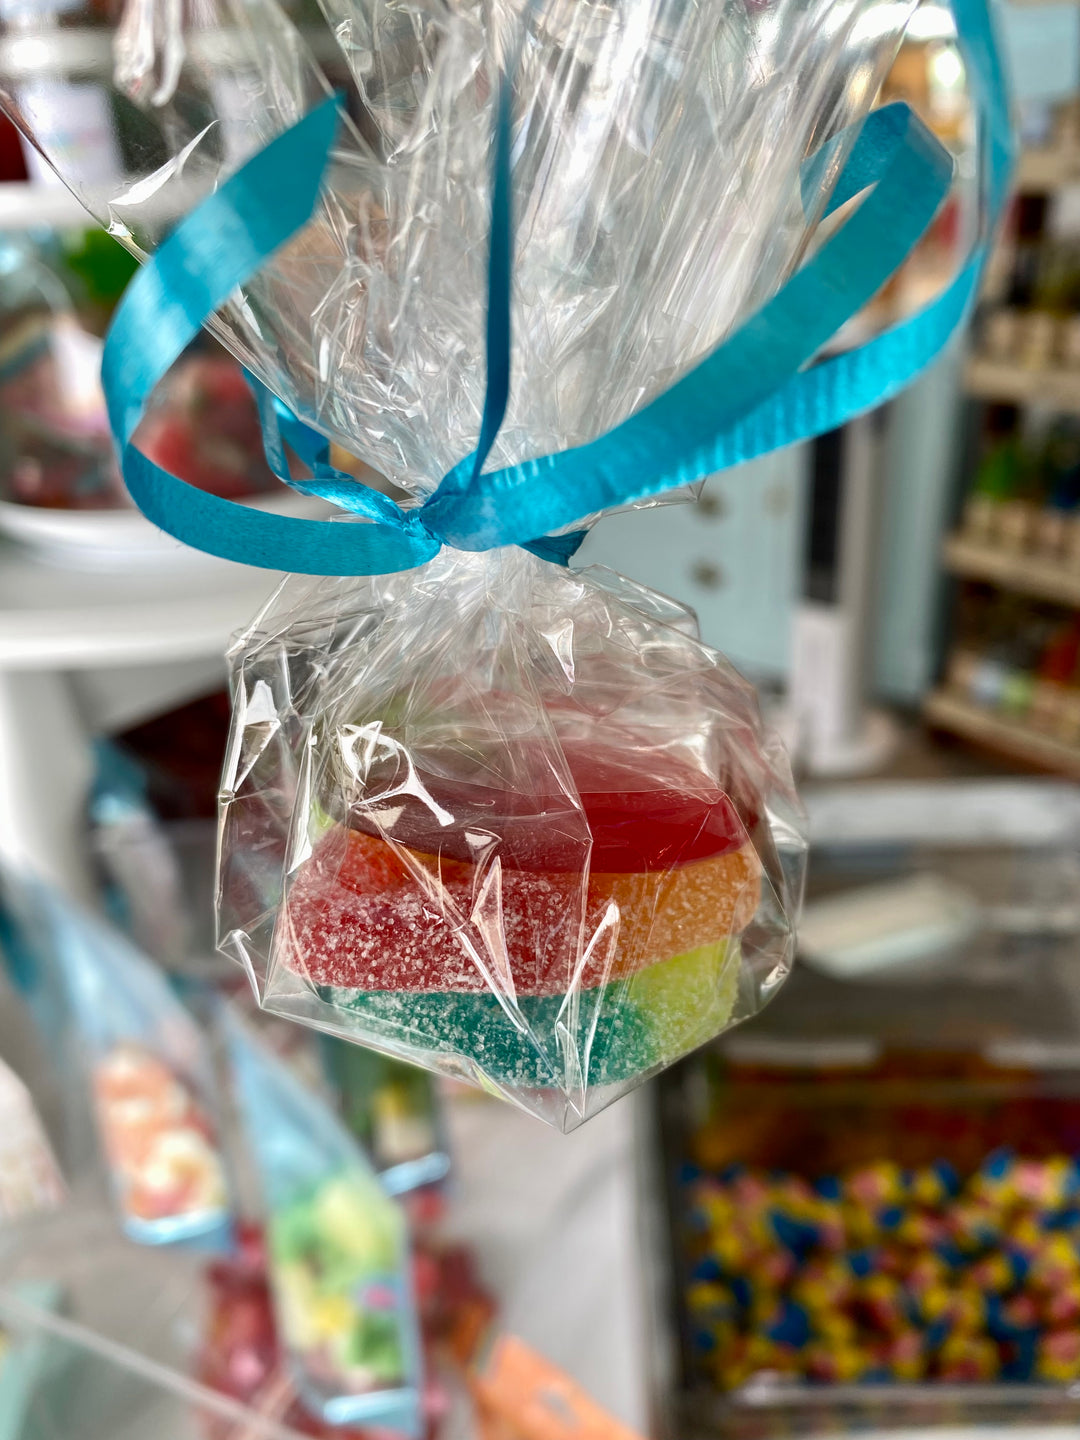 Baby Shower Favors, Wedding Candy Favors